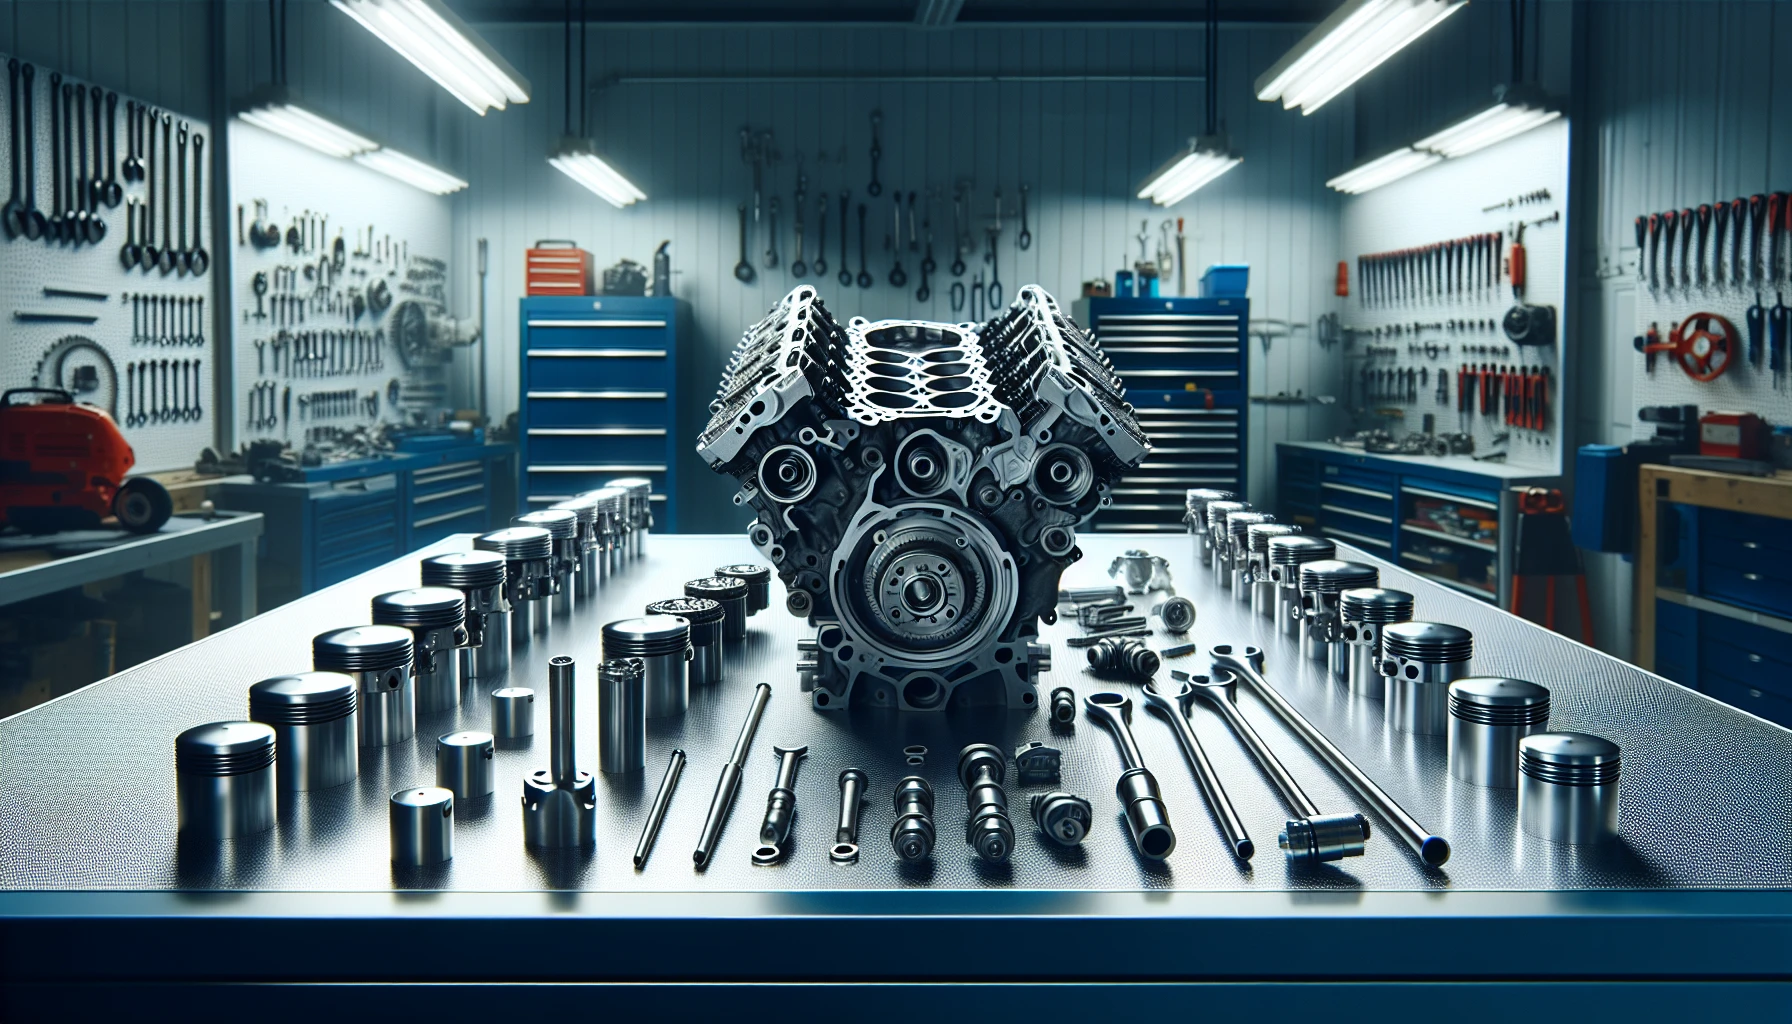 Engine disassembled for inspection